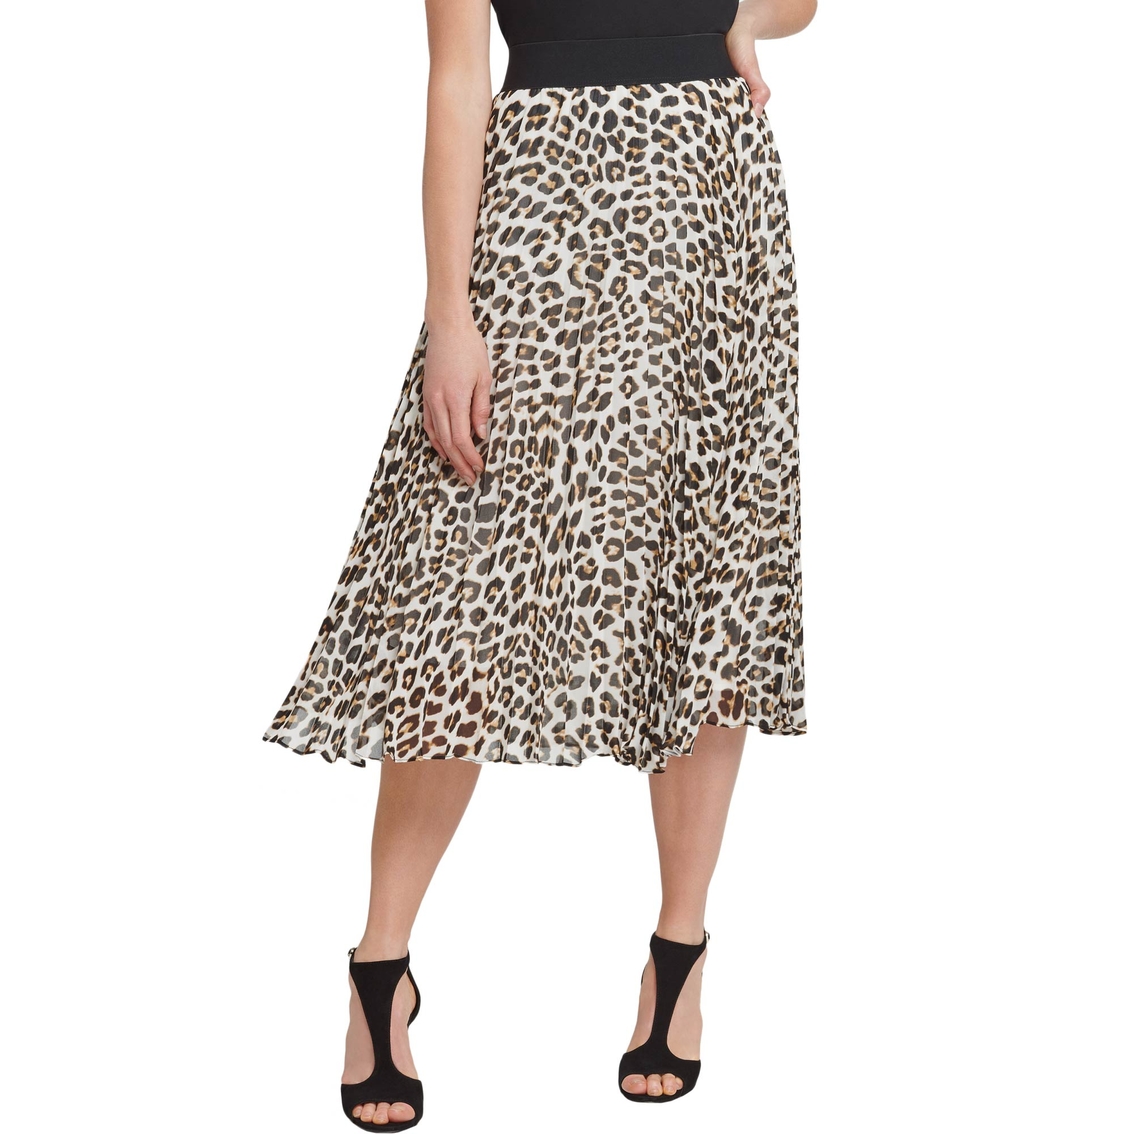 Dkny Pull On Pleated Midi Skirt | Skirts | Apparel | Shop The Exchange